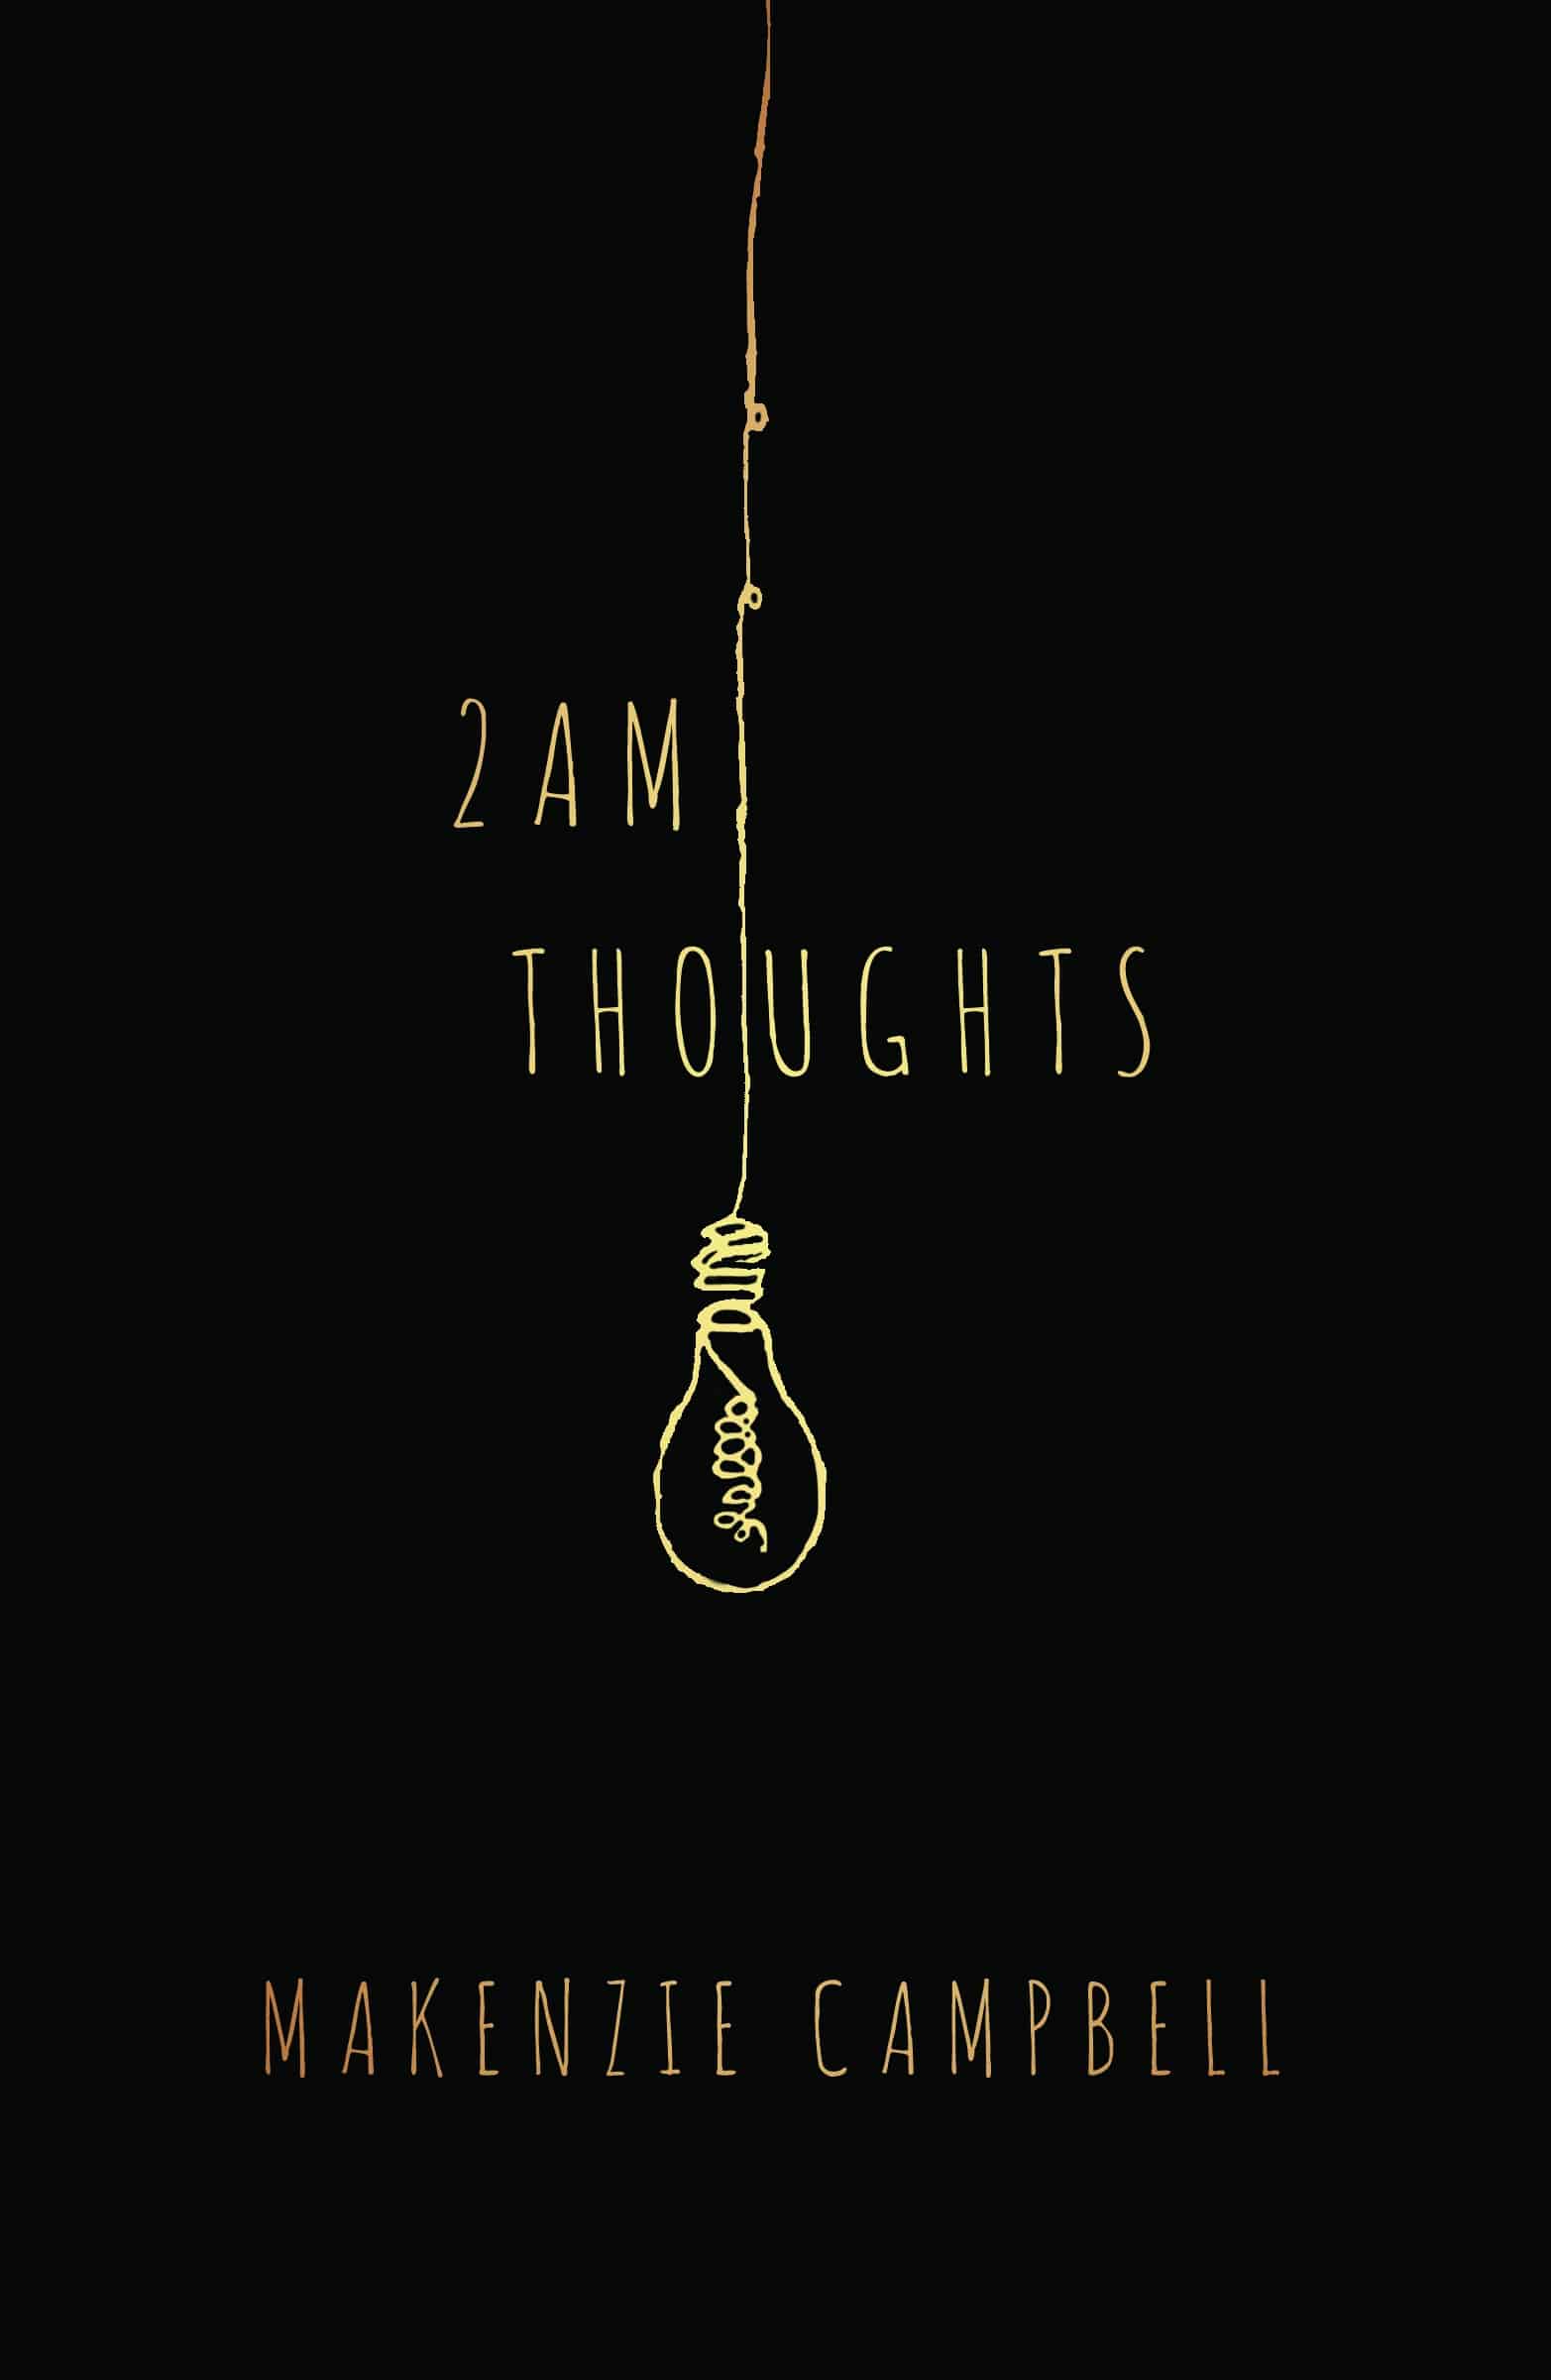 Cover image for 2am Thoughts